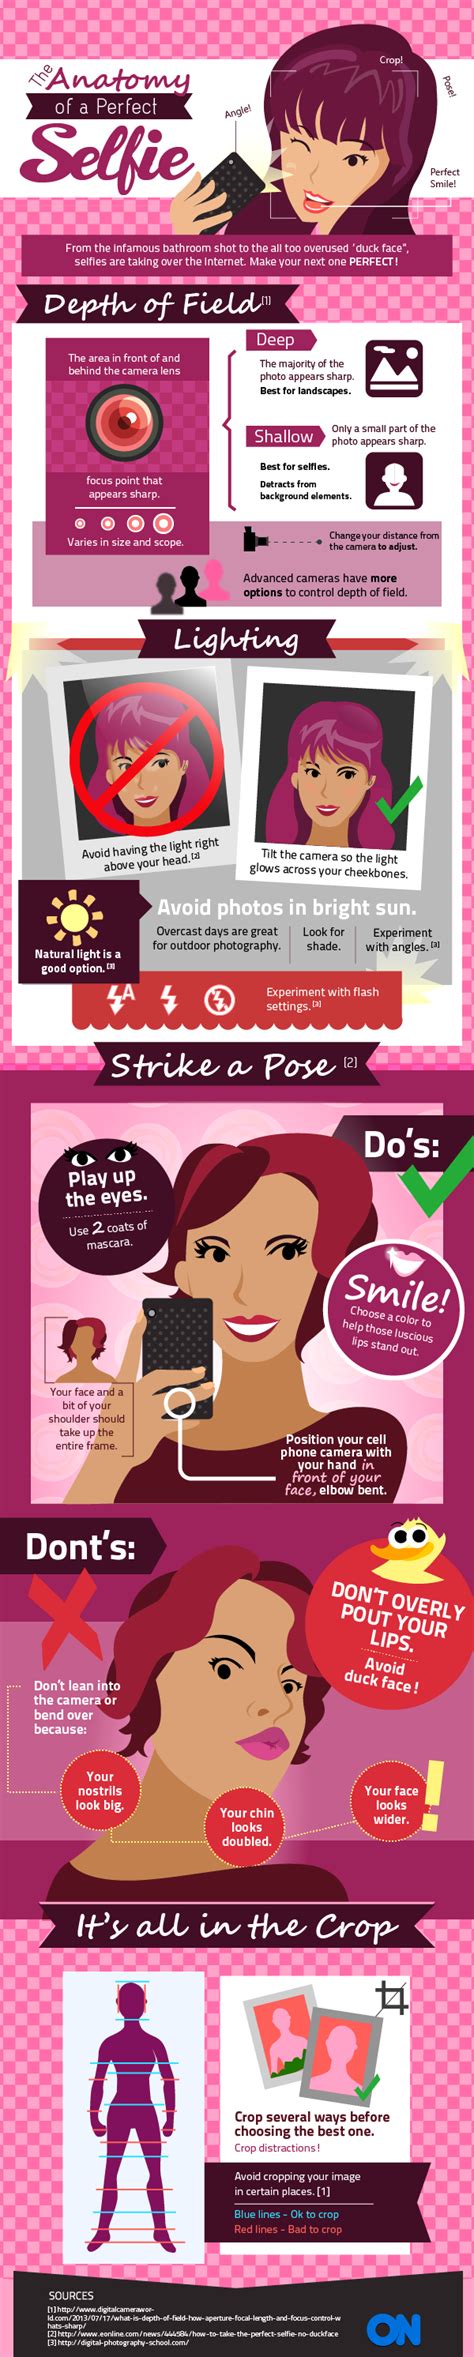 The Anatomy Of A Perfect Selfie Infographic